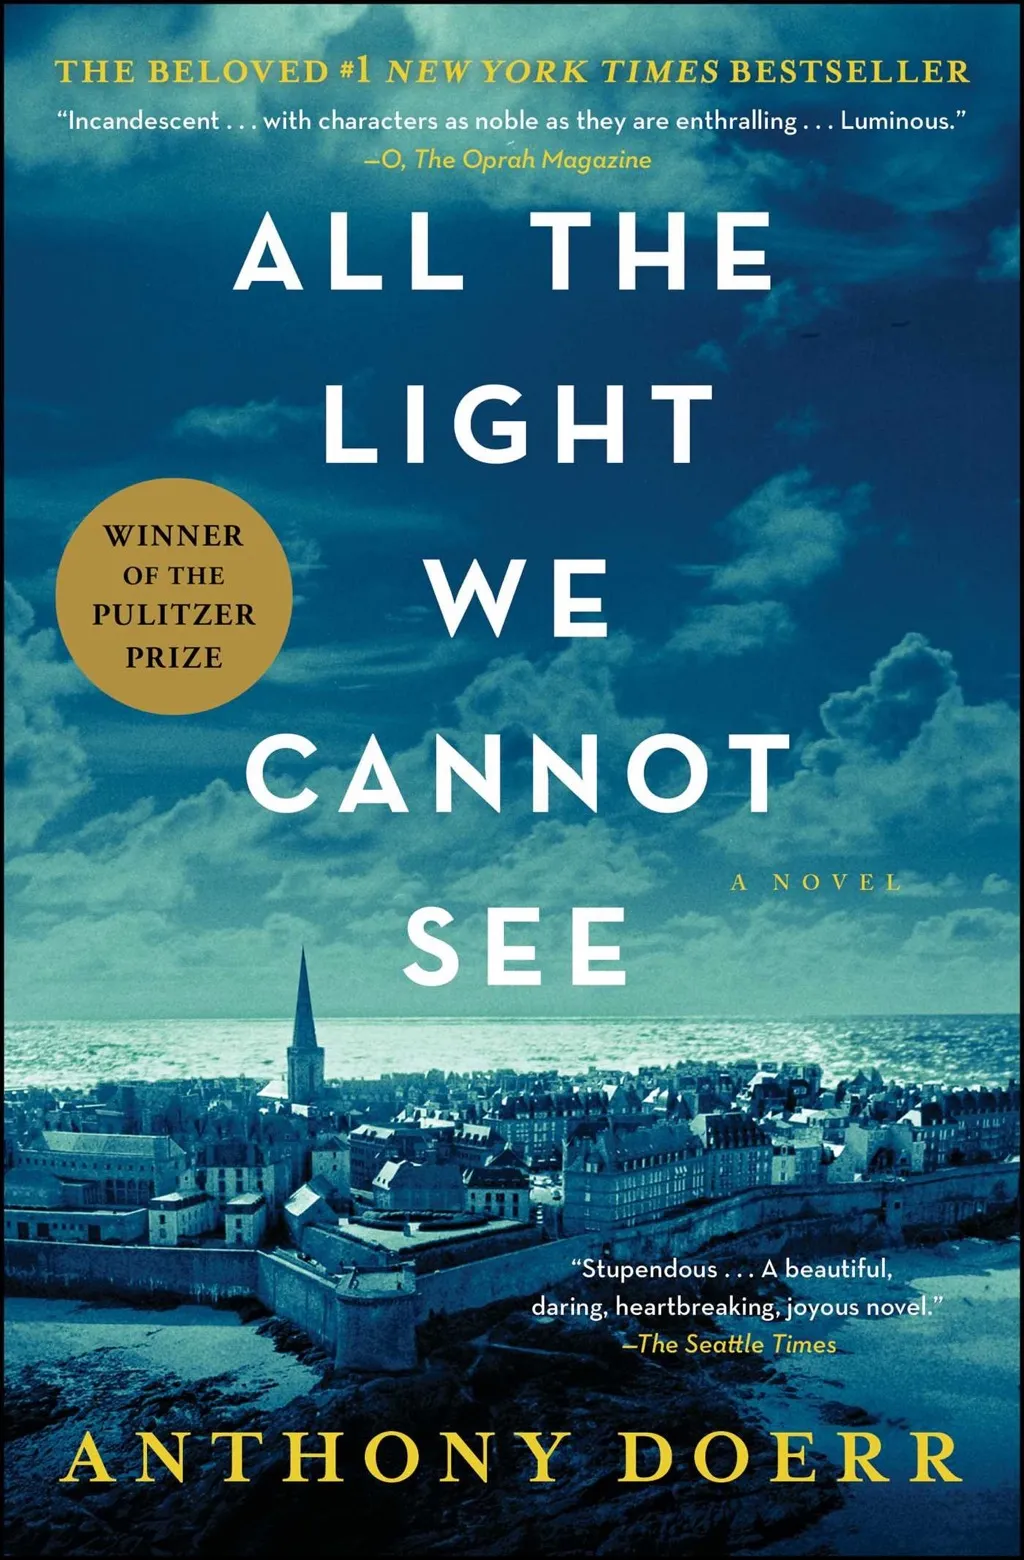 All the Light We Cannot See books every woman should read in her 40s